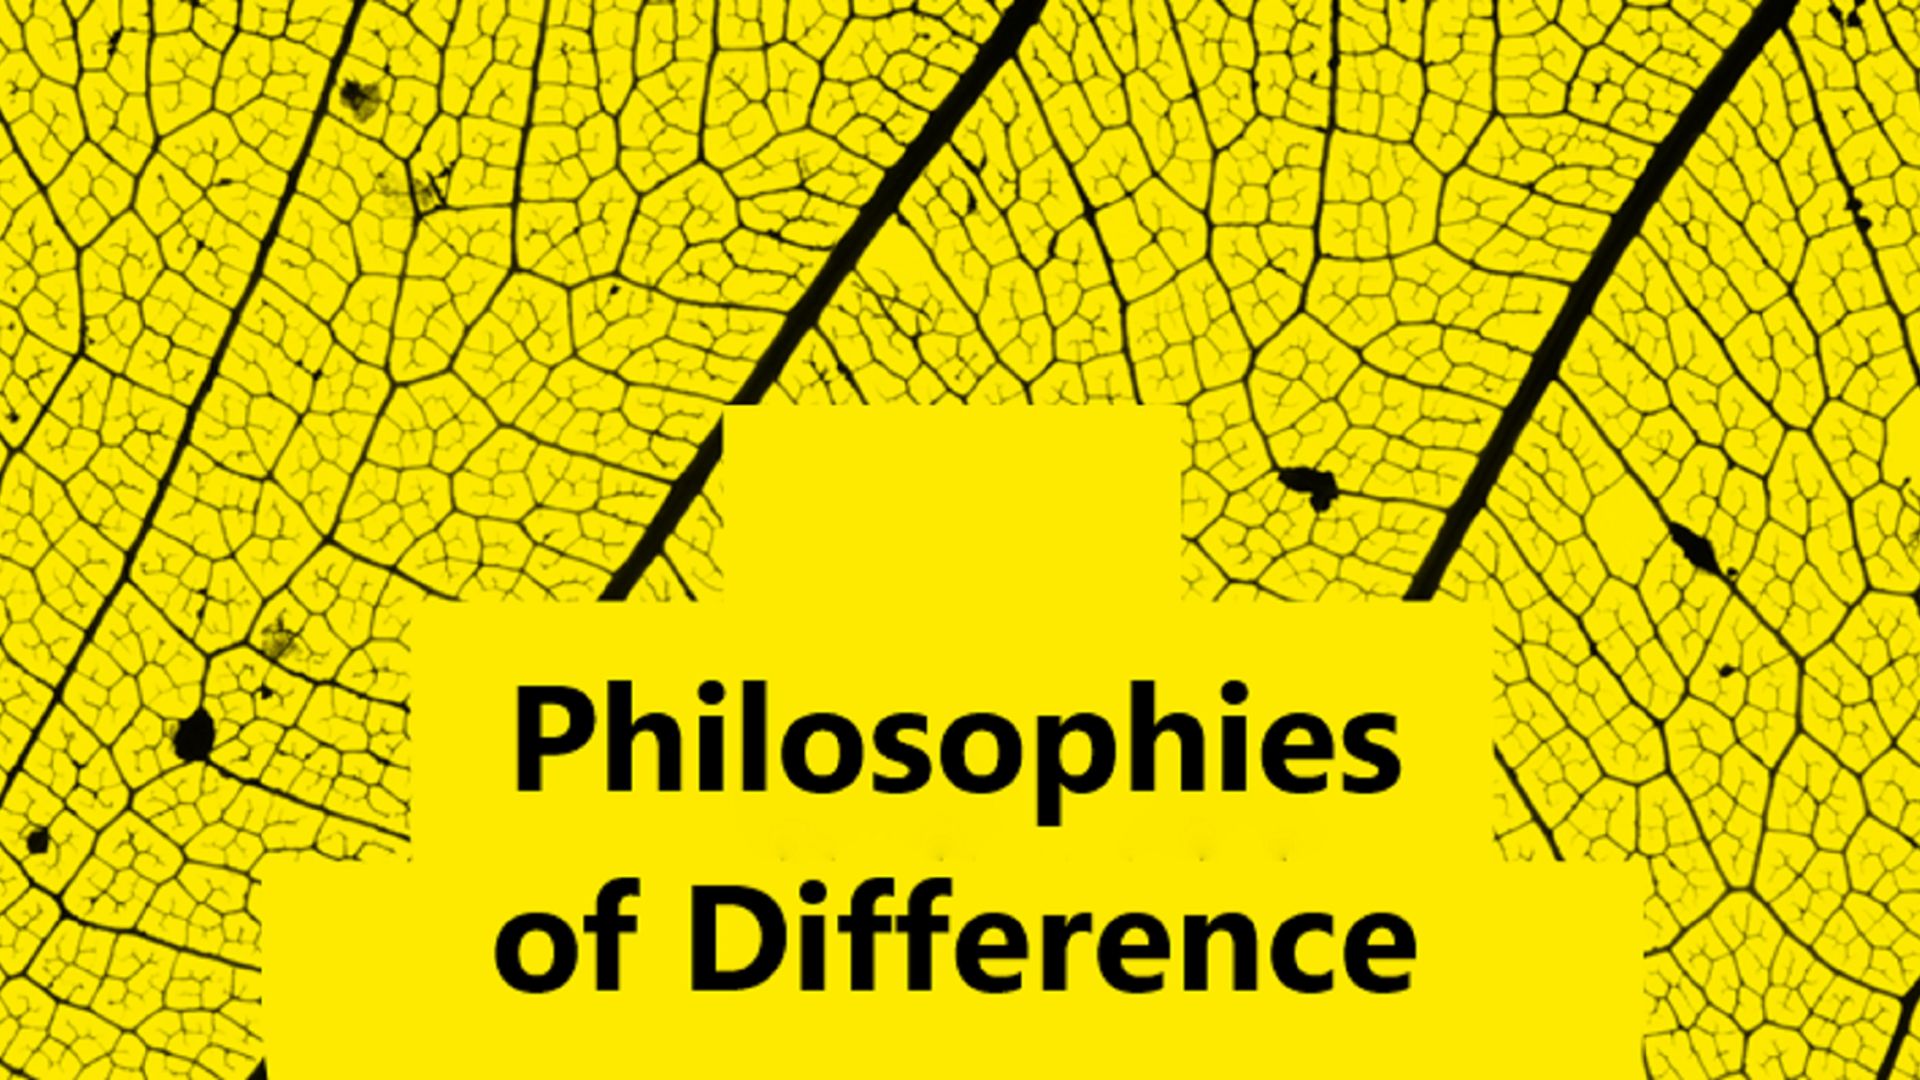 Philosophies-of-Difference-1920.jpg